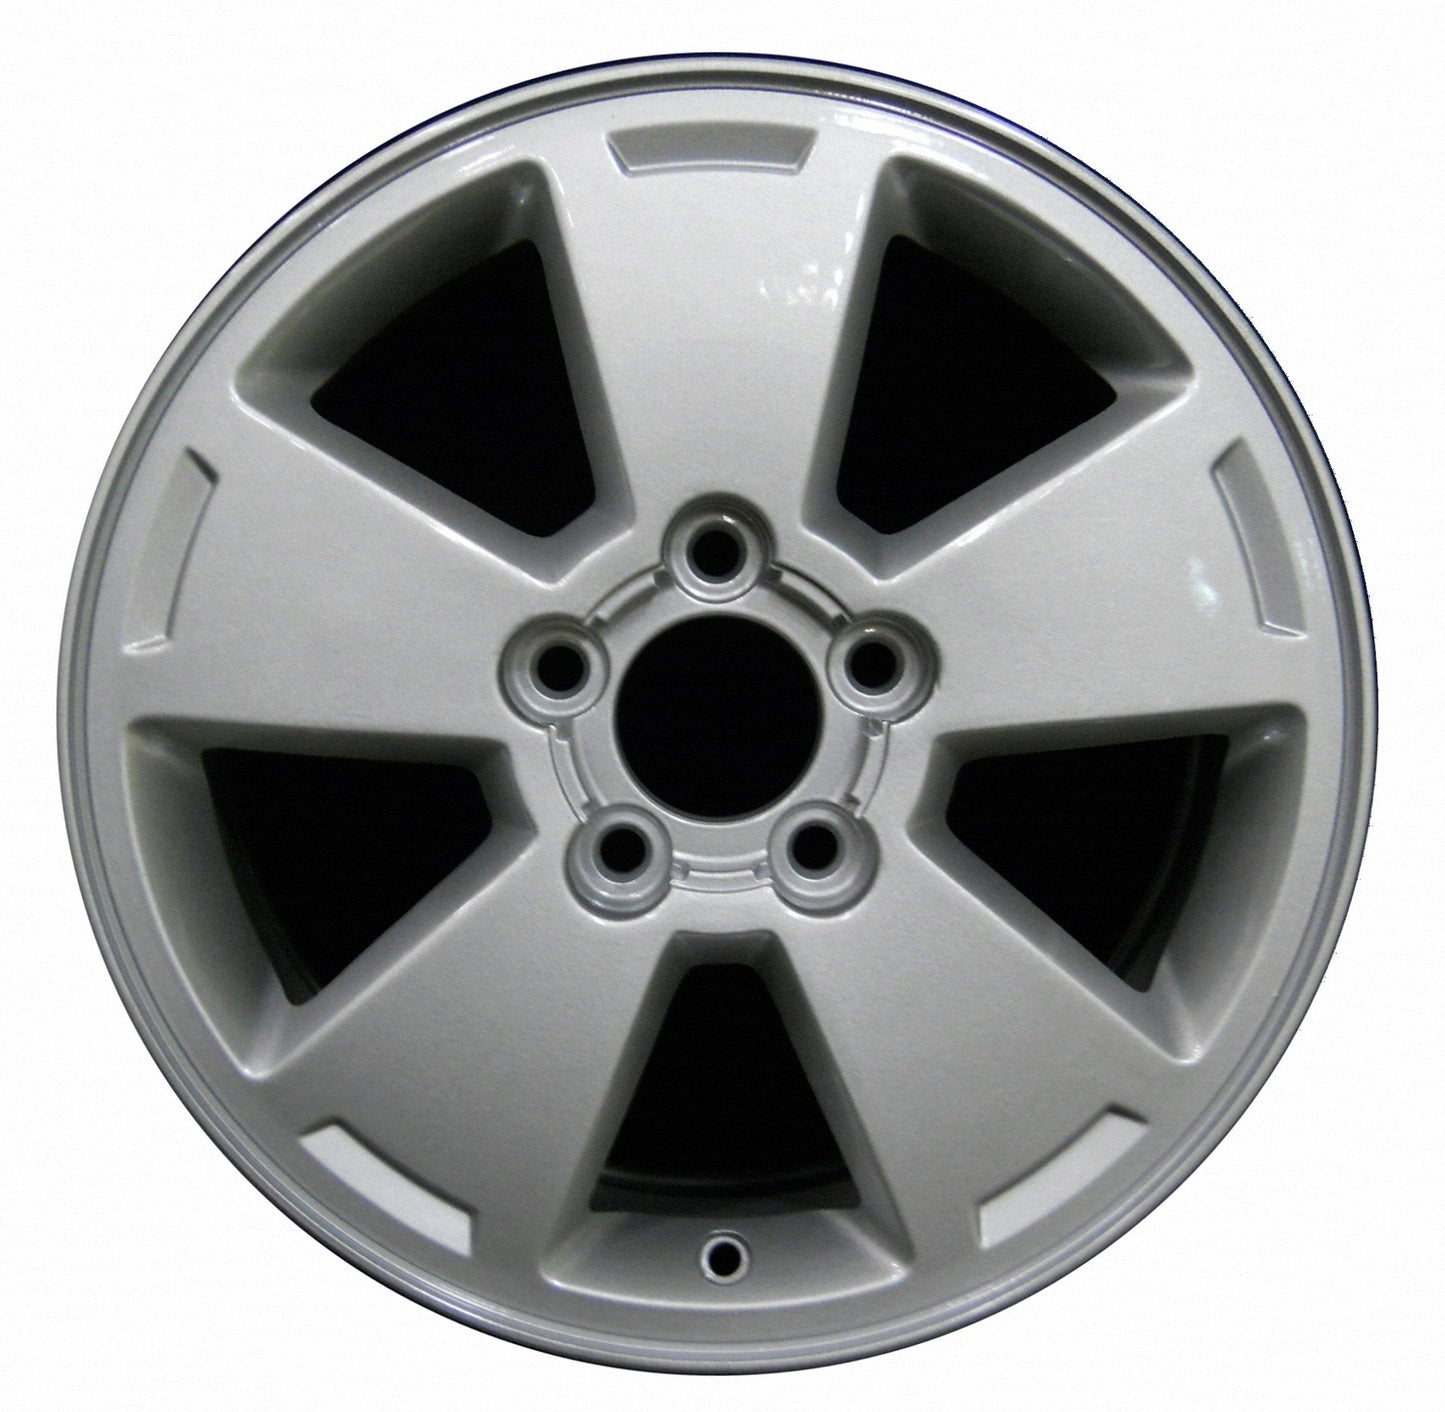 Chevrolet Monte Carlo  2006, 2007 Factory OEM Car Wheel Size 16x6.5 Alloy WAO.5070.PS09.FF